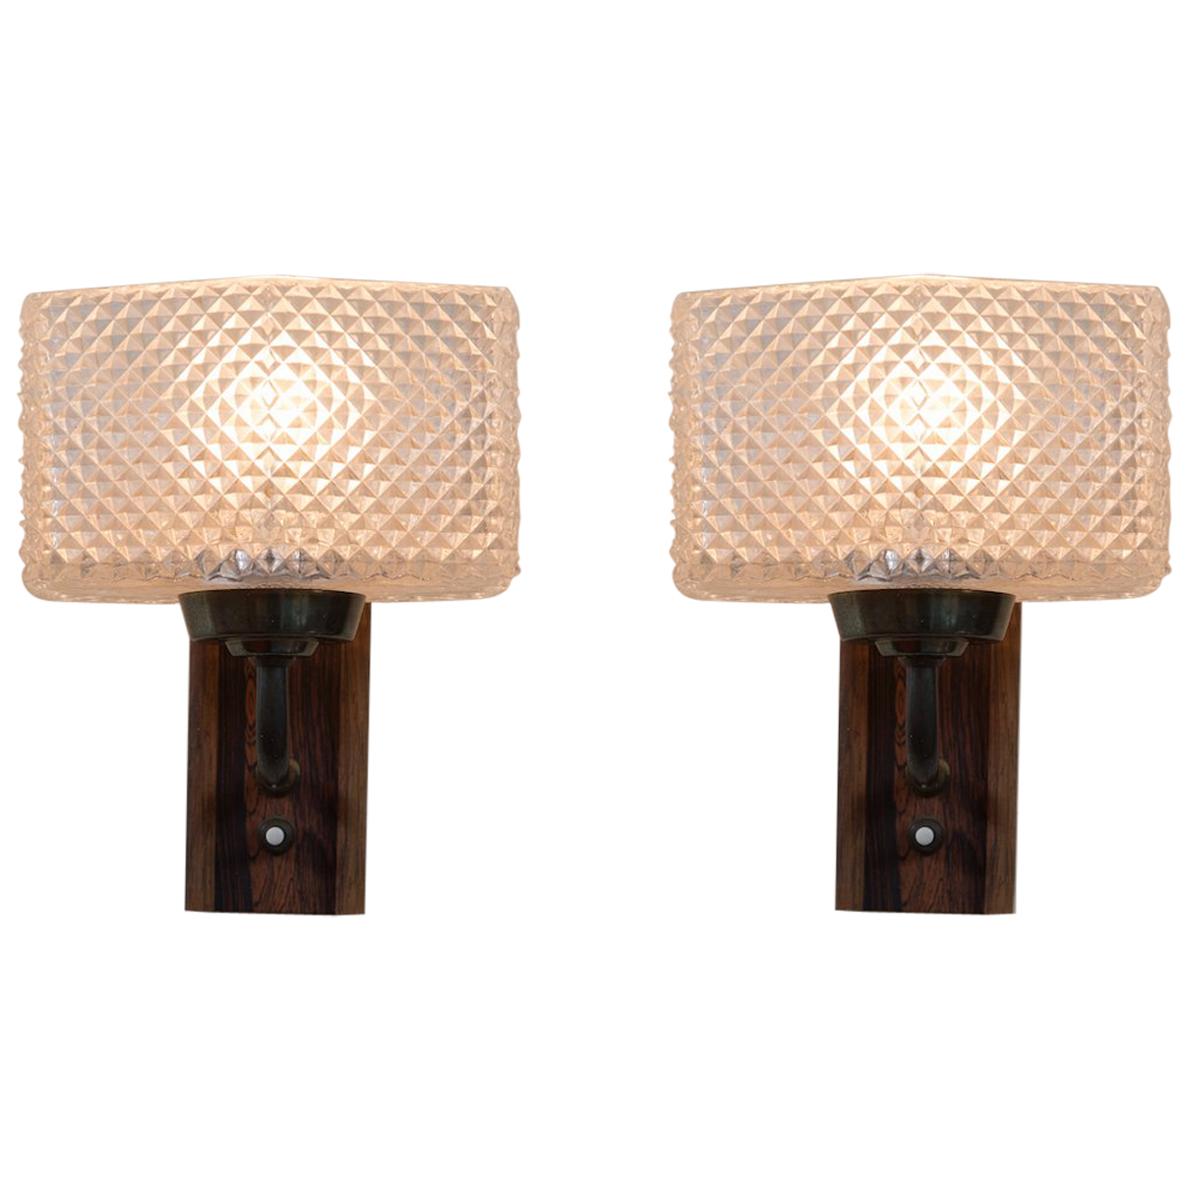 One Pair of Mid-Century Modern Wall Sconces